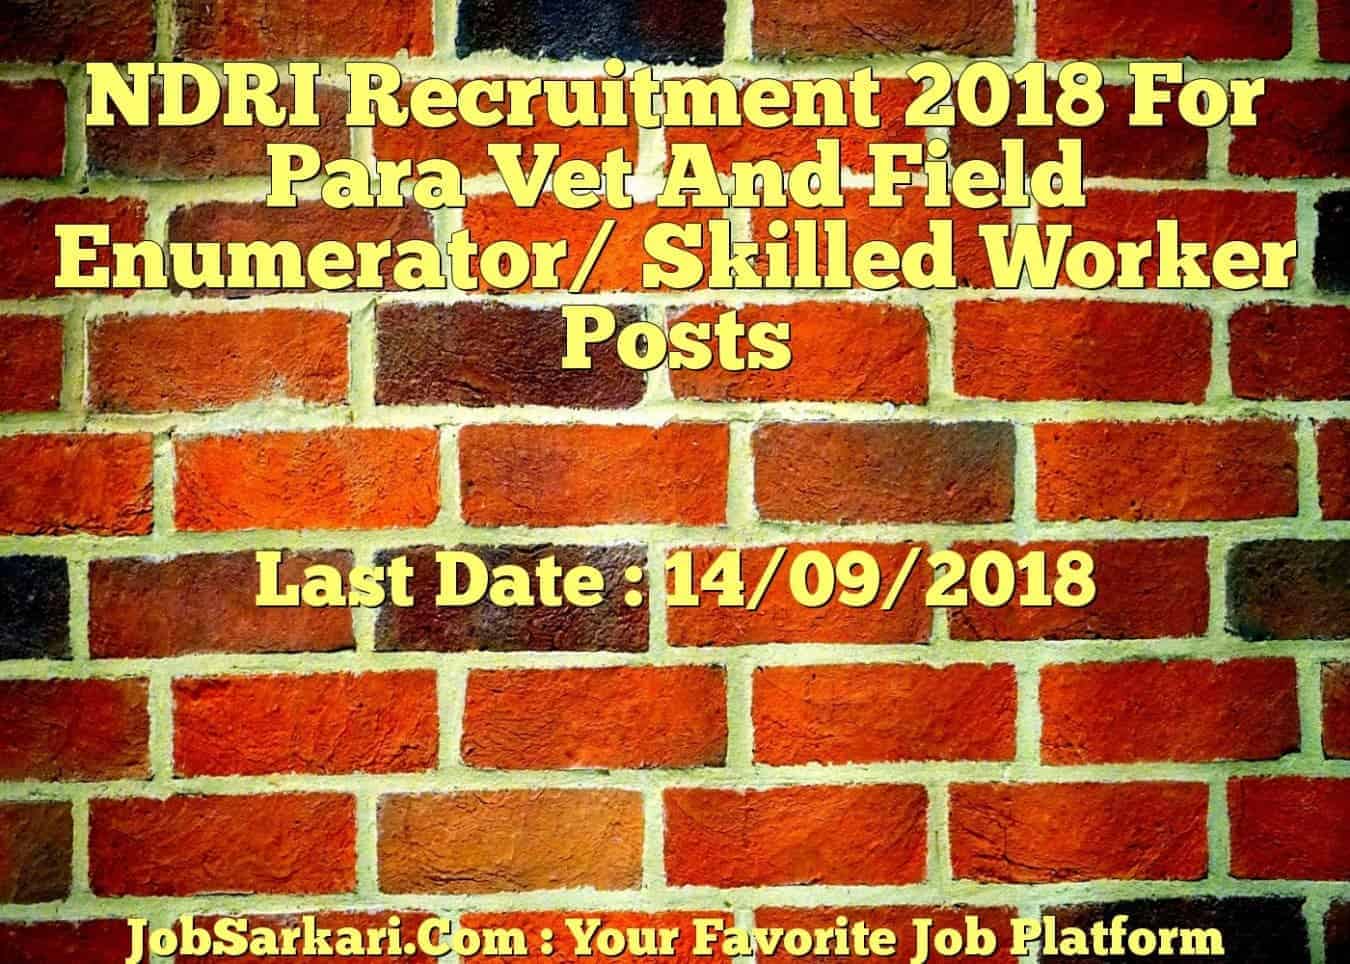 NDRI Recruitment 2018 For Para Vet And Field Enumerator/ Skilled Worker Posts